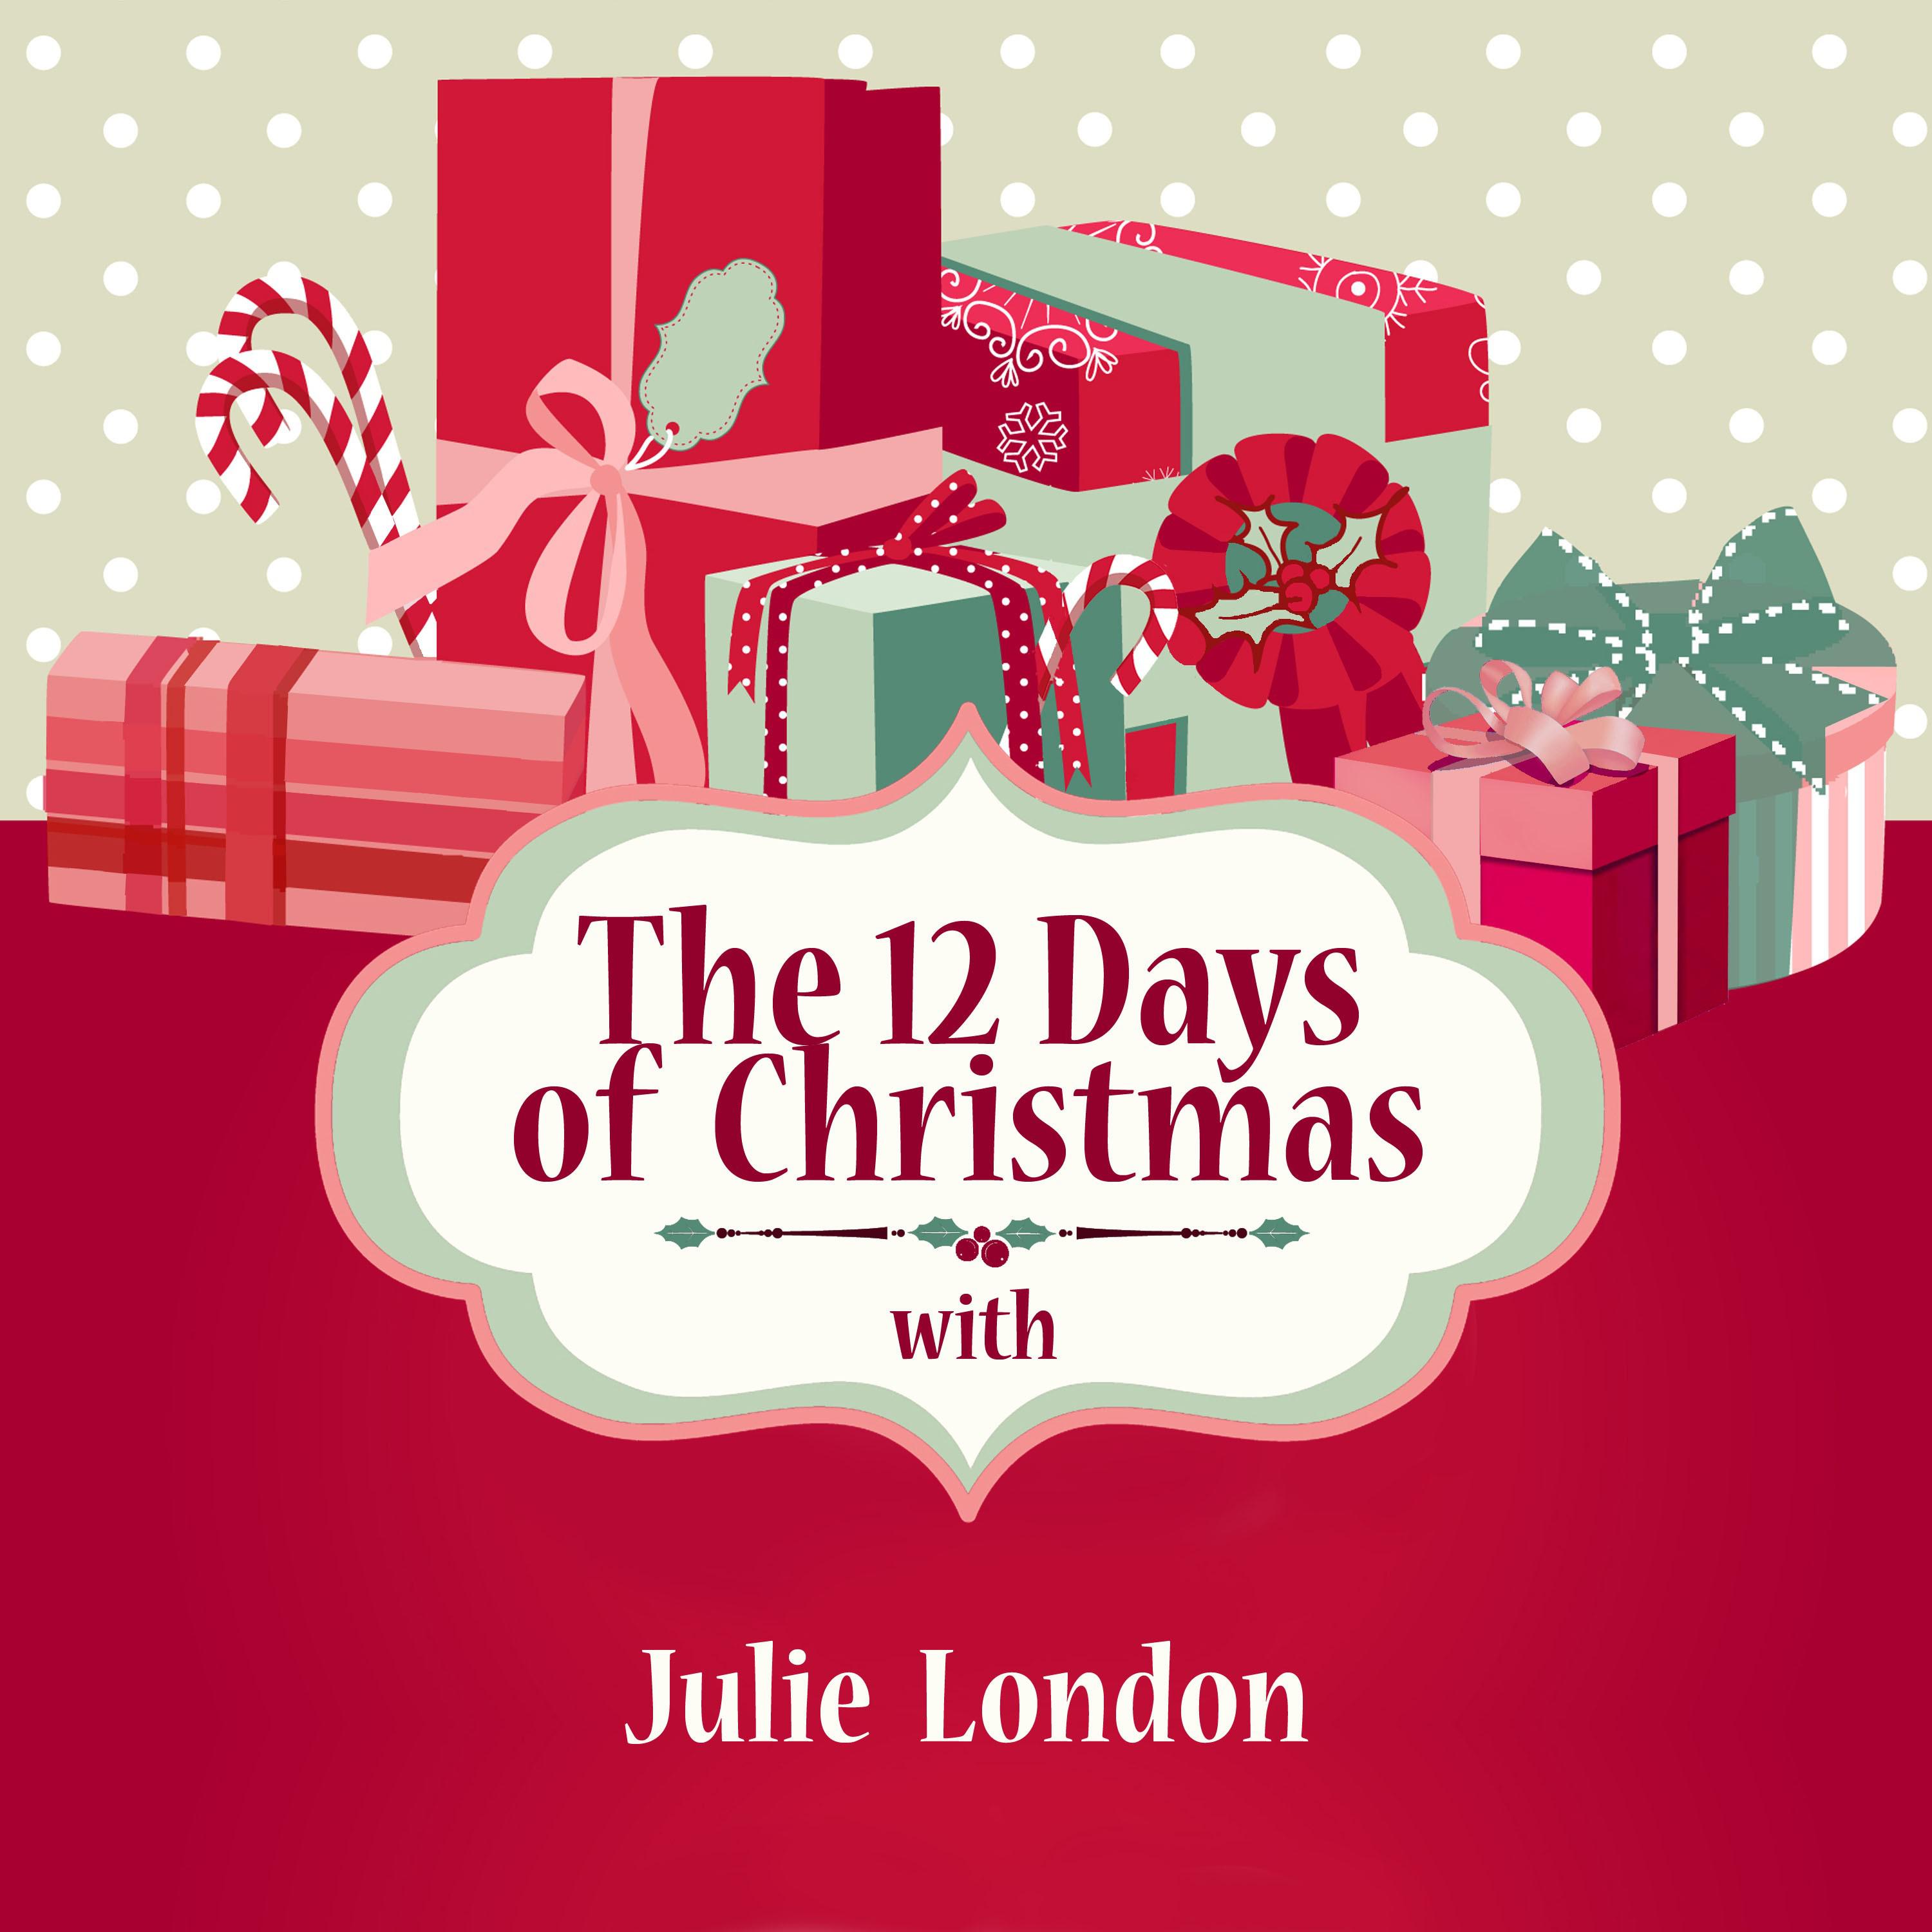 The 12 Days of Christmas with Julie London